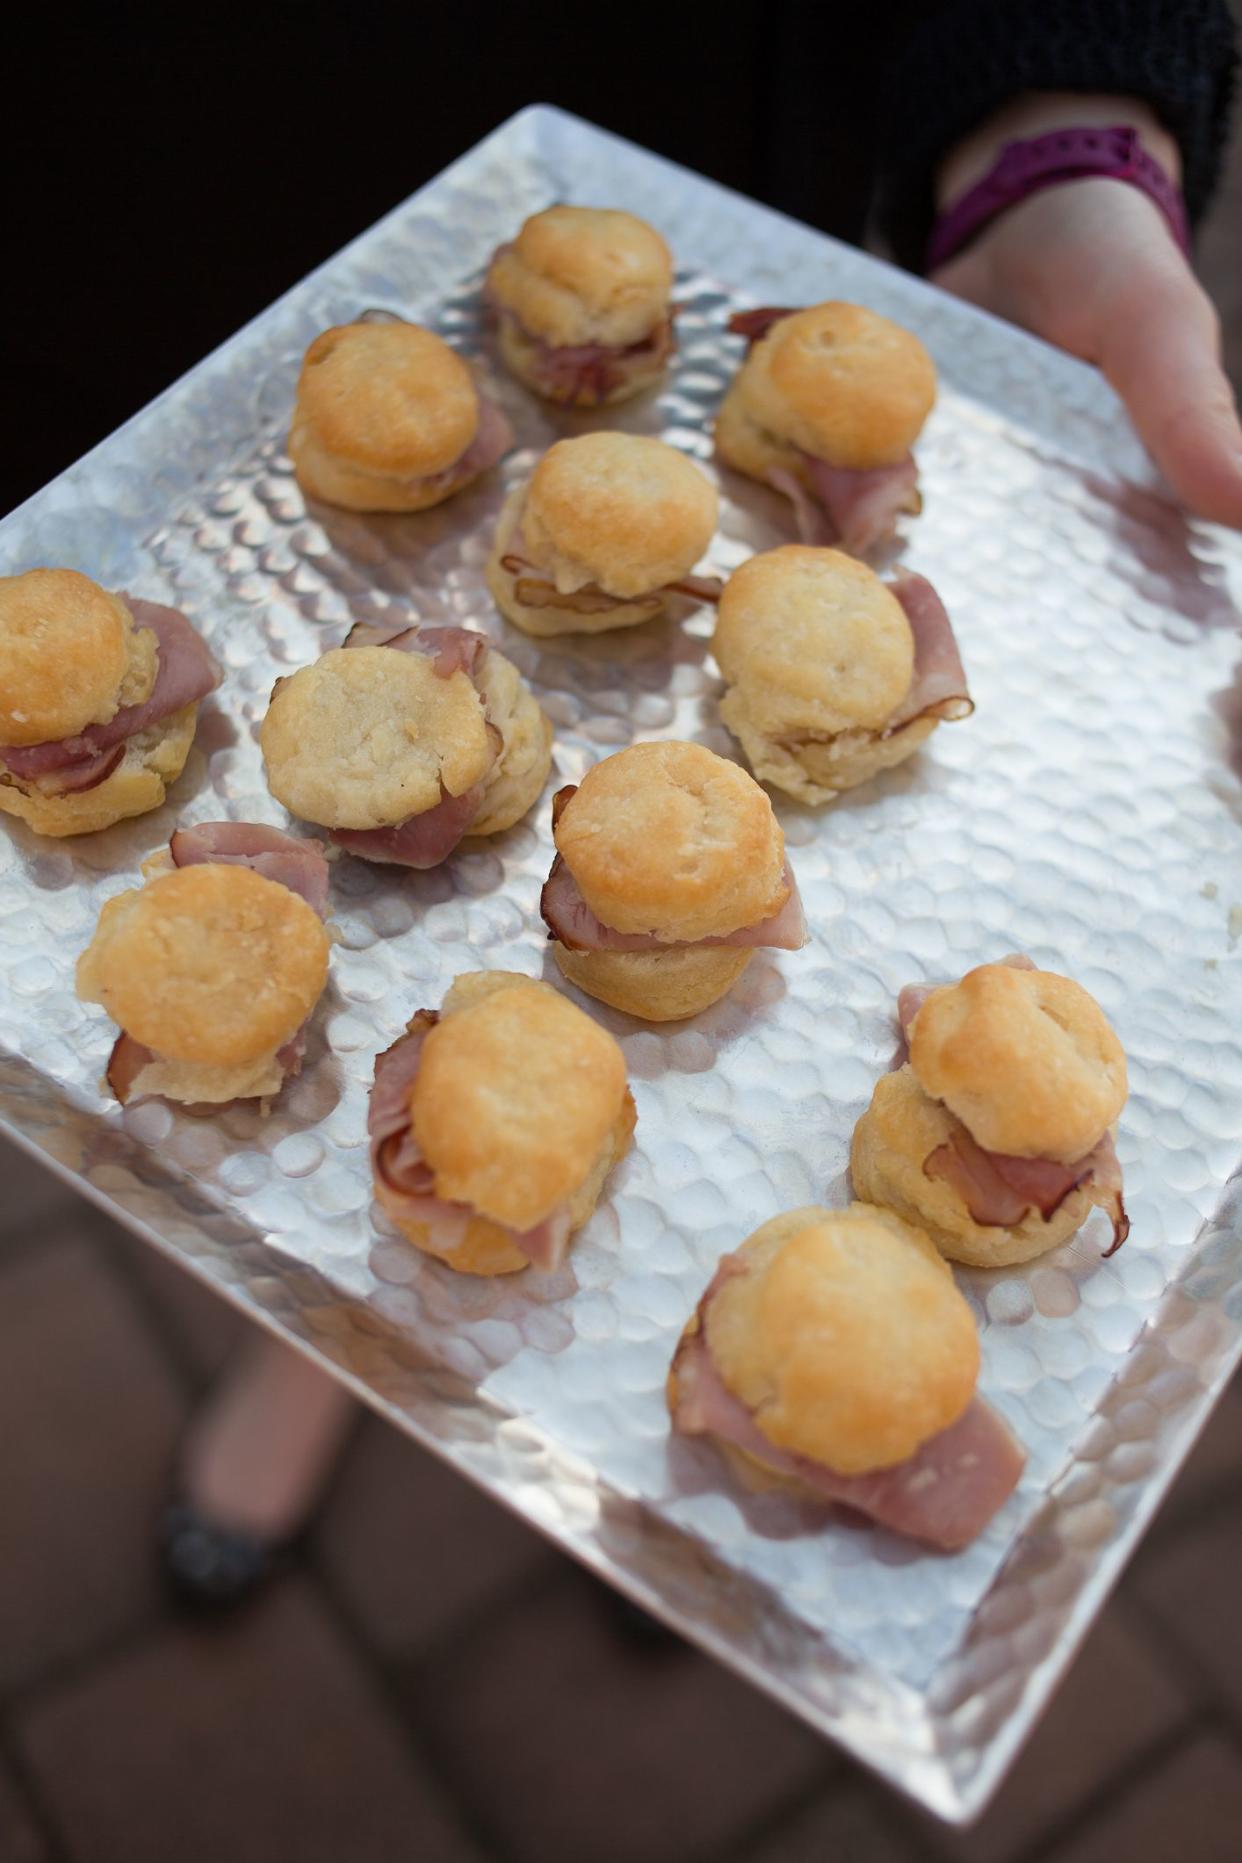 Country Ham Biscuits on a Silver Platter